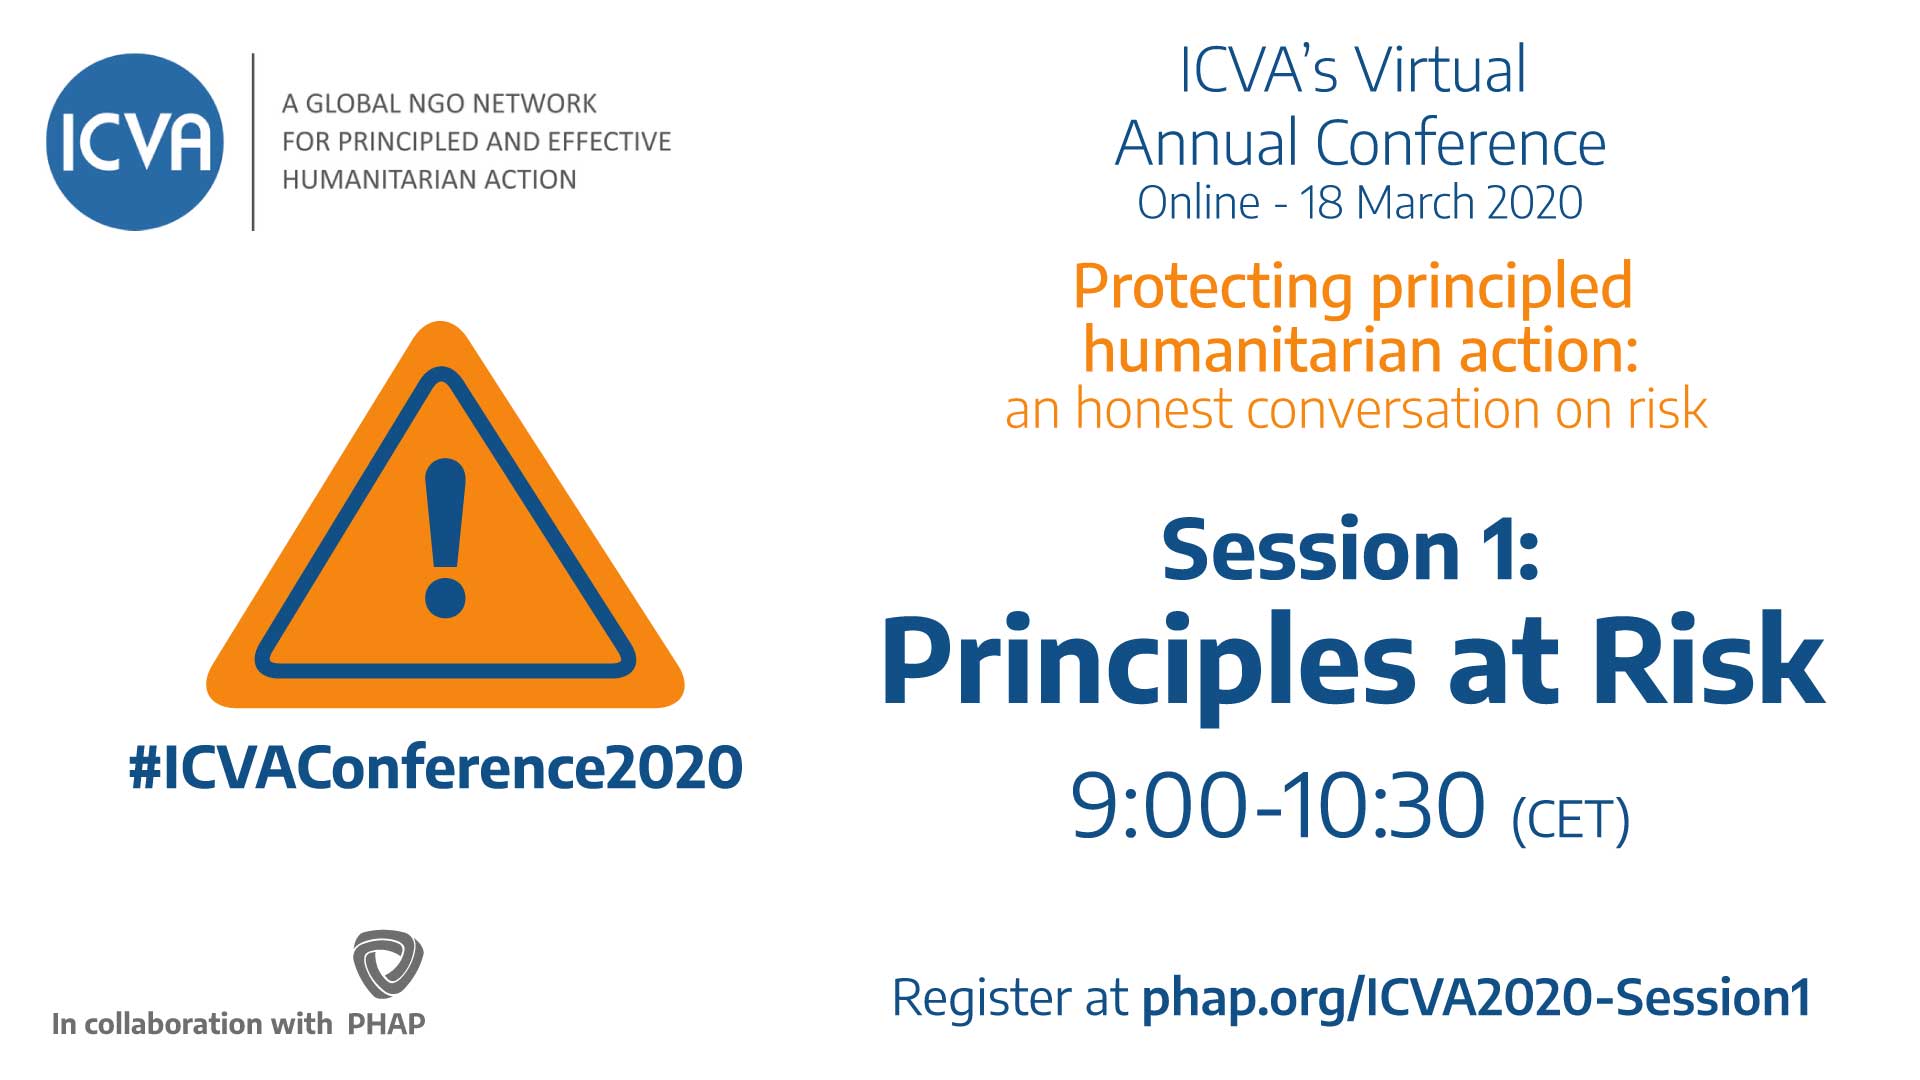 Banner for the ICVA Annual Conference 2020: Session 1